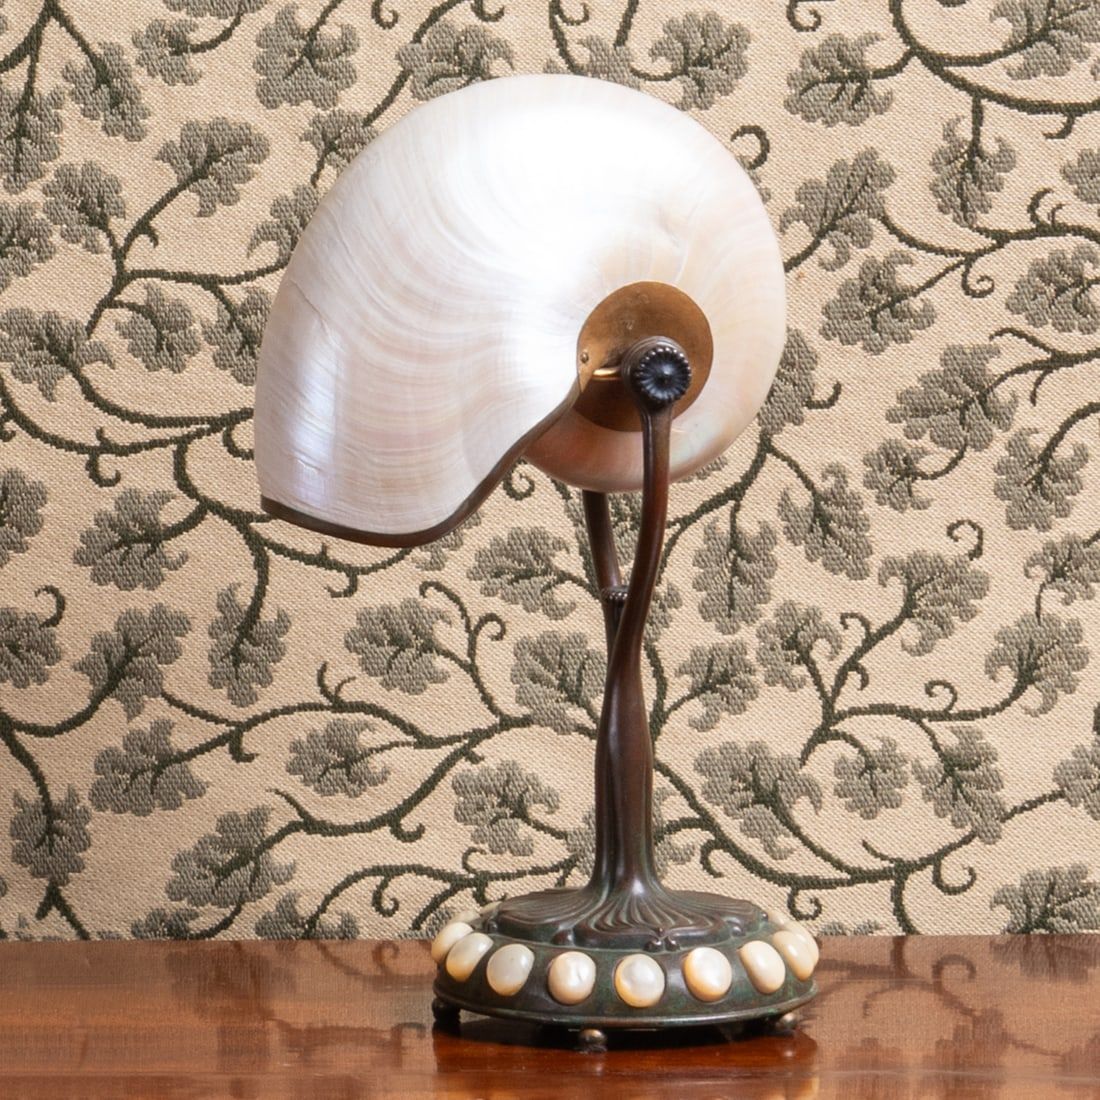 Tiffany bronze Nautilus shell desk lamp, which sold for $23,040 at Stair Galleries.
